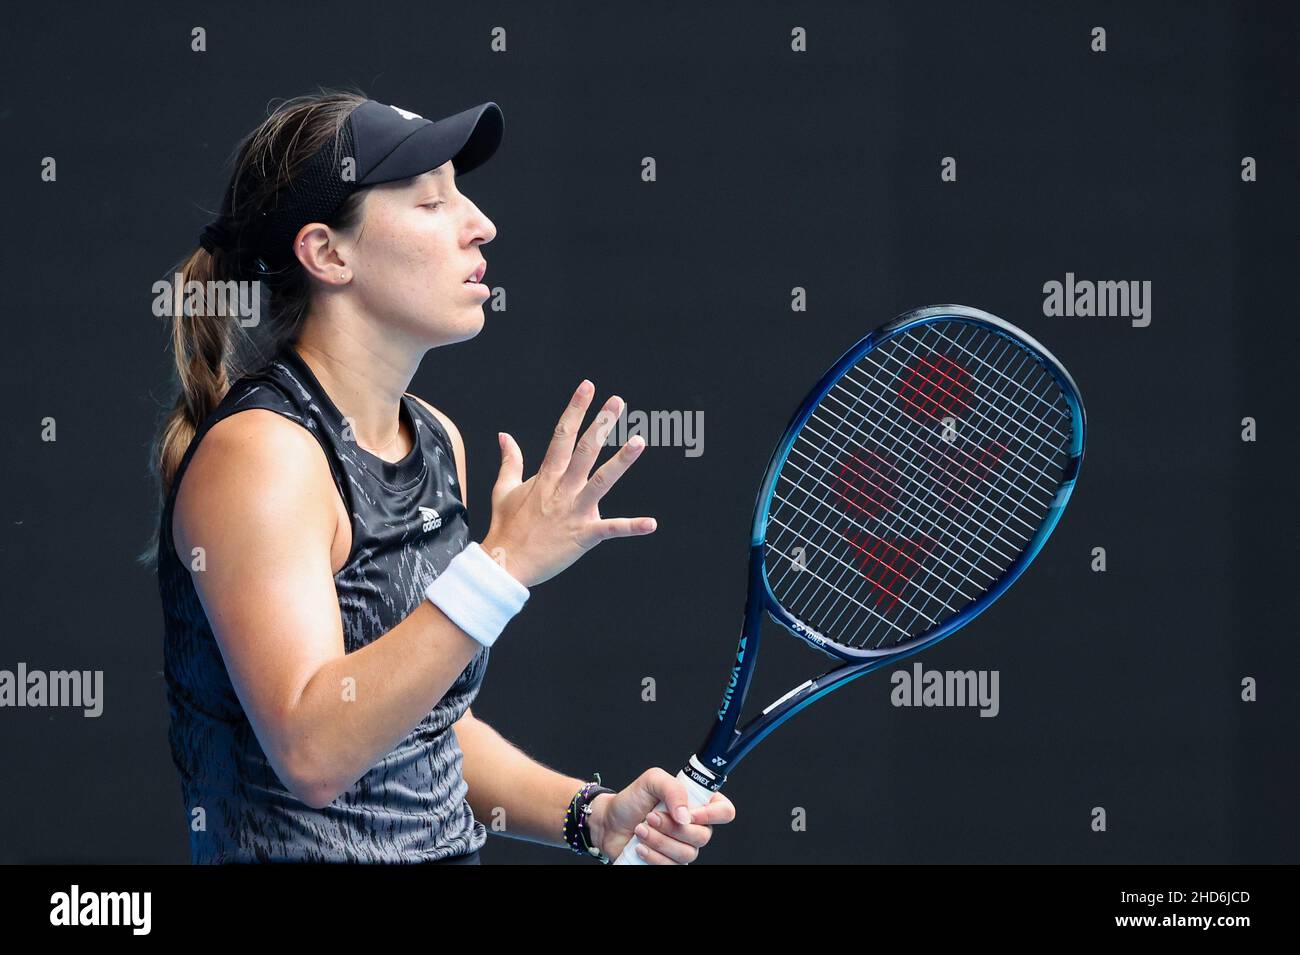 Bloodstained slag ortodoks Melbourne, Australia. 4th Jan, 2022. Jessica Pegula of the US reacts after  a point against Irina-Camelia Begu of Romania during their first round  women's singles match at the WTA Melbourne Summer Set